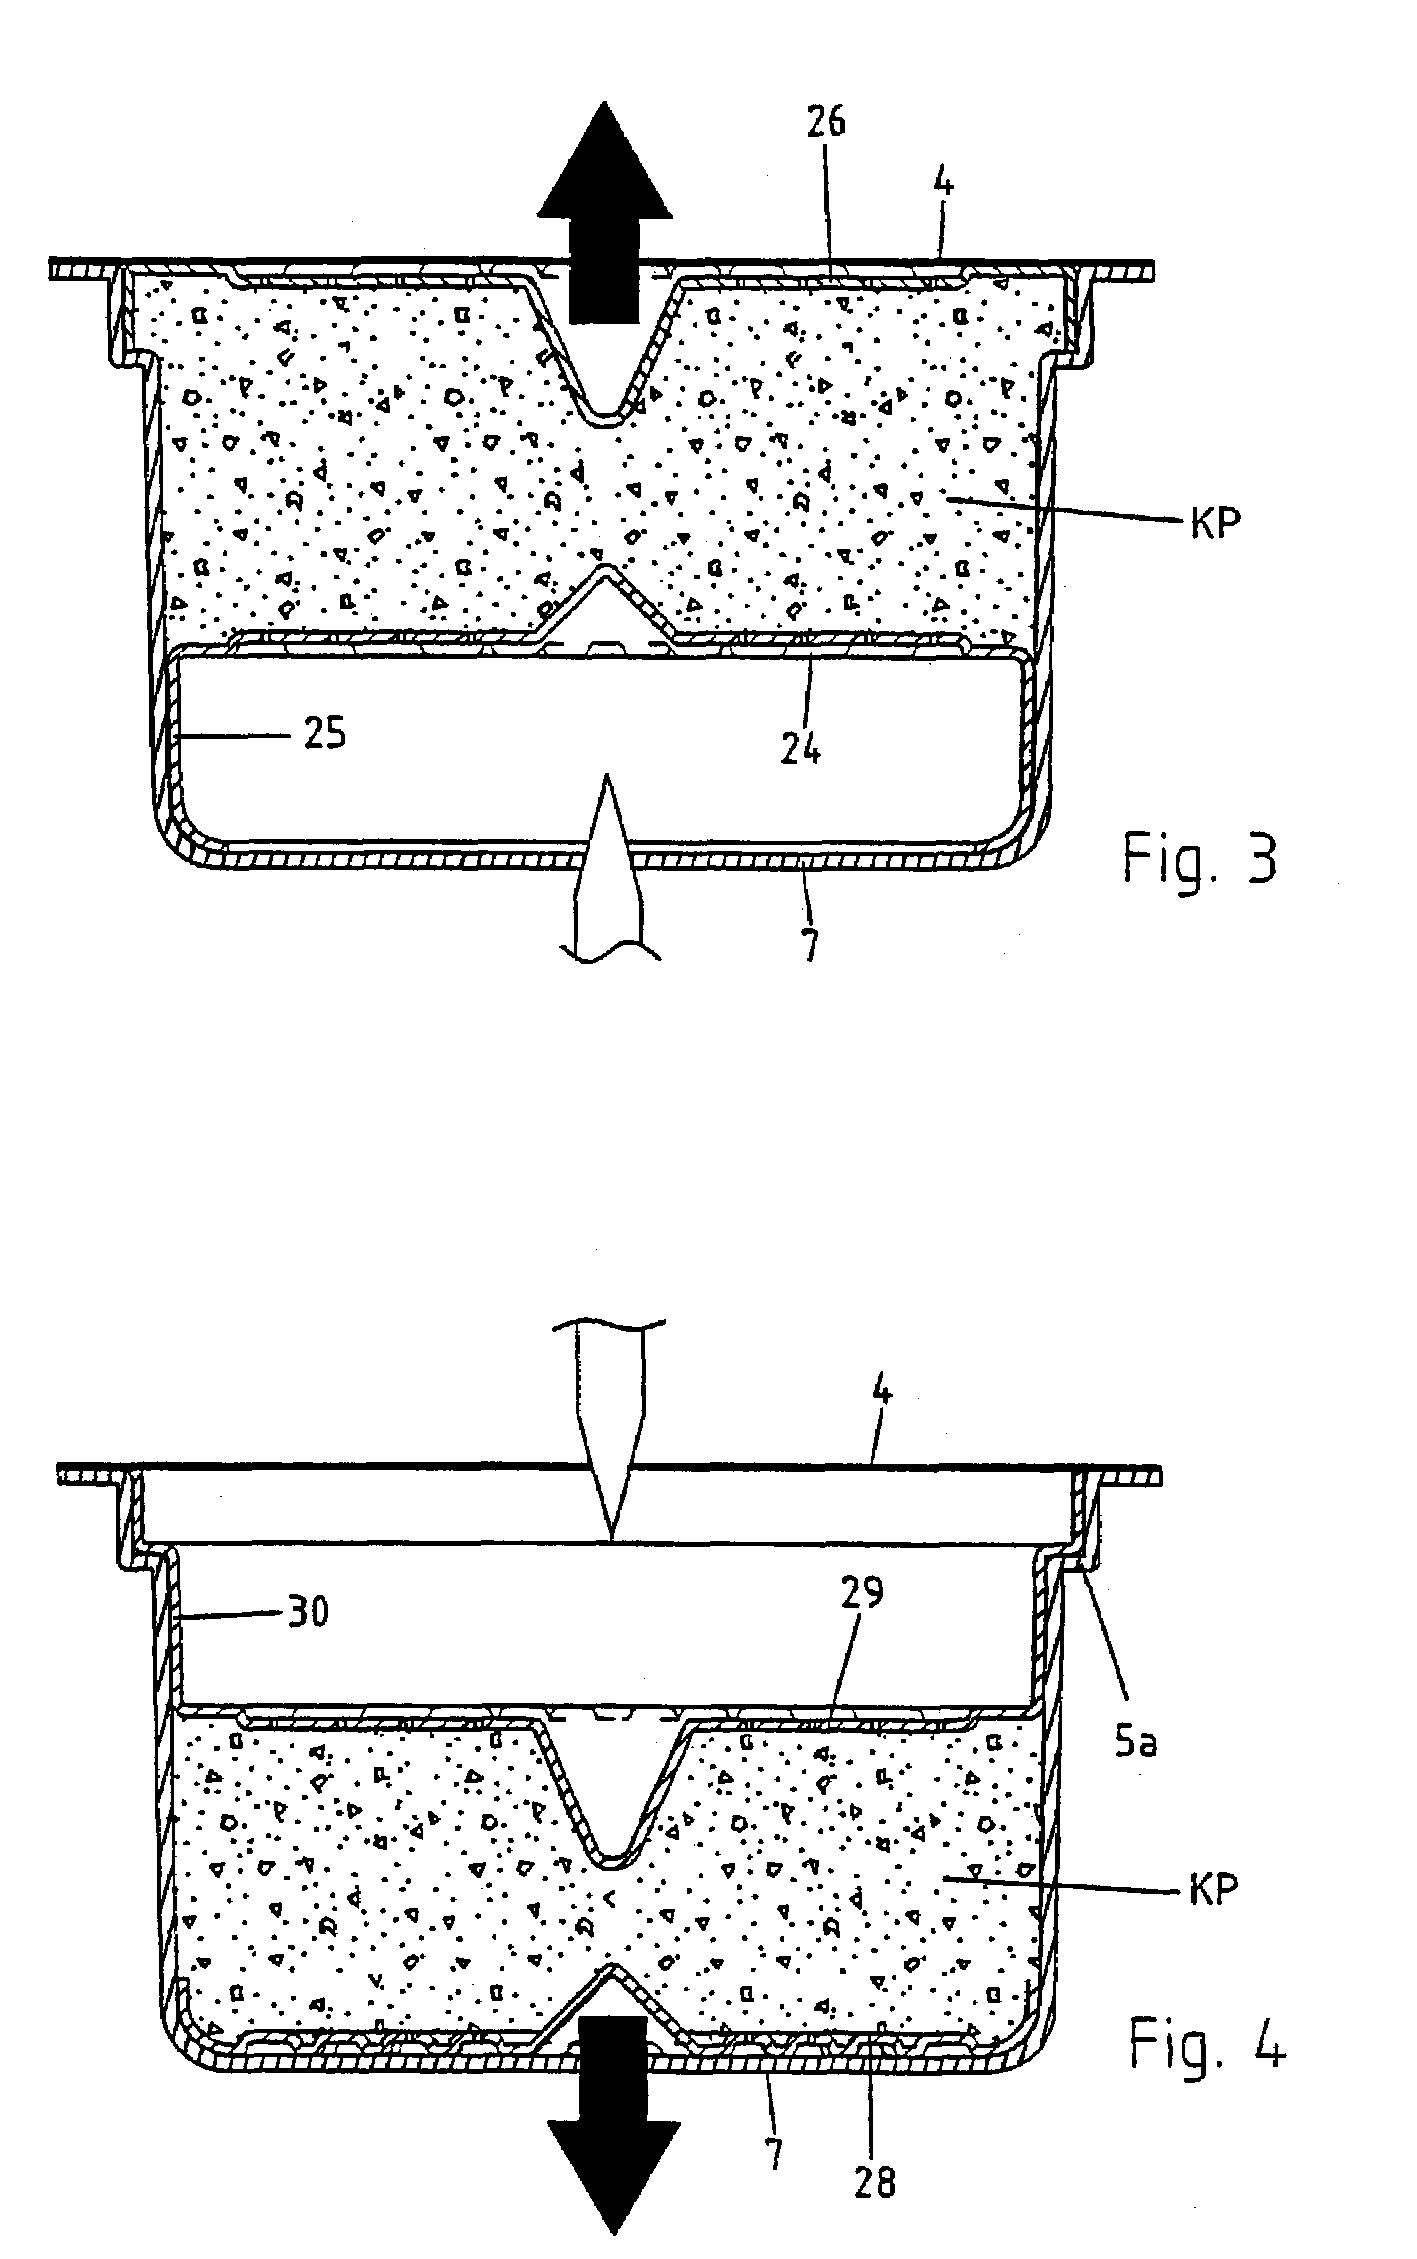 Cartridge containing a single serving of a particulate substance for preparing a beverage